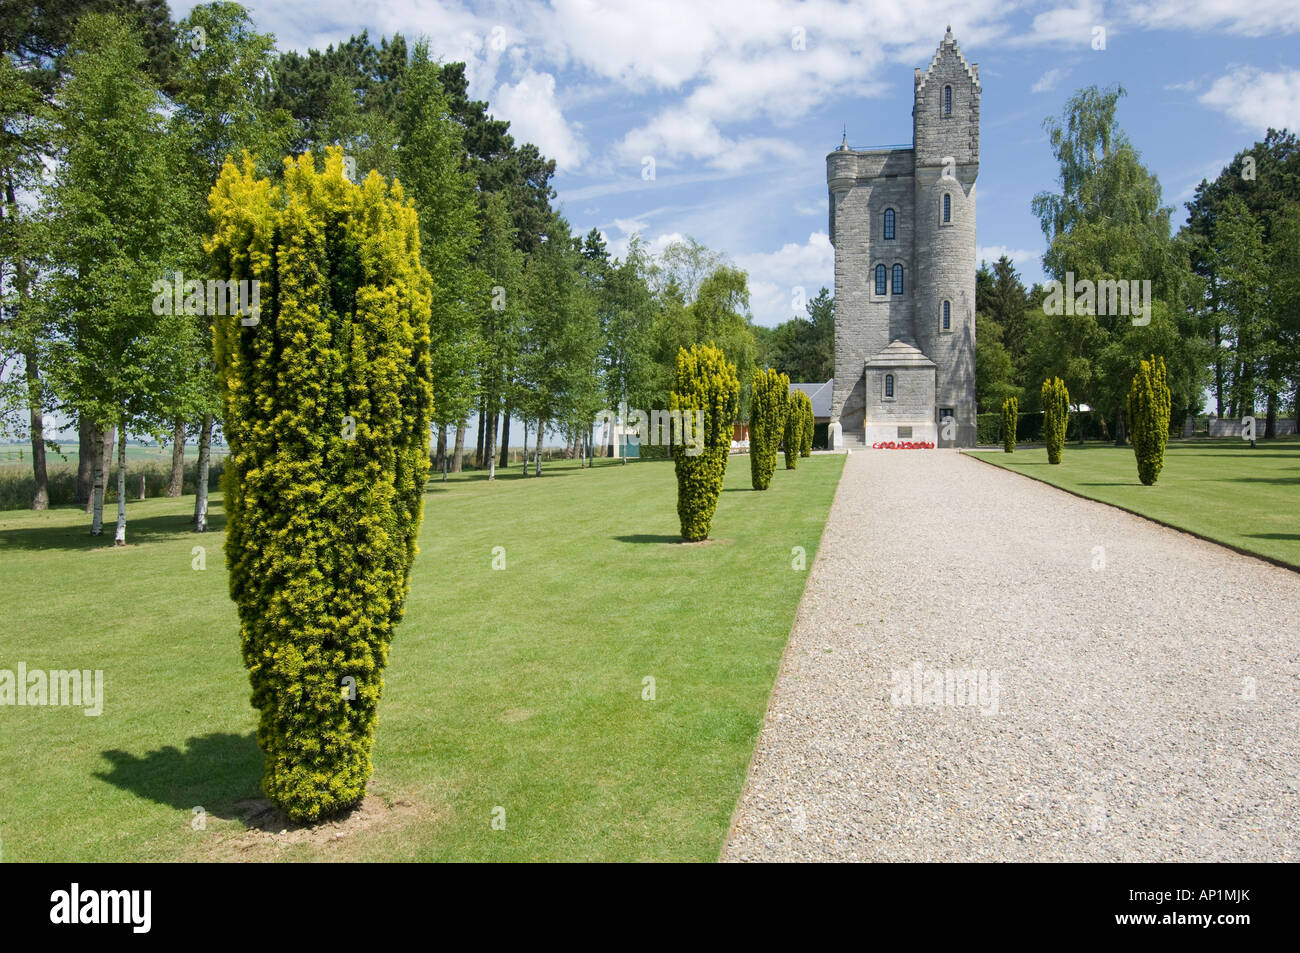 Ulster tower WW1 memorial a Thiepval sulla Somme, Francia Foto Stock